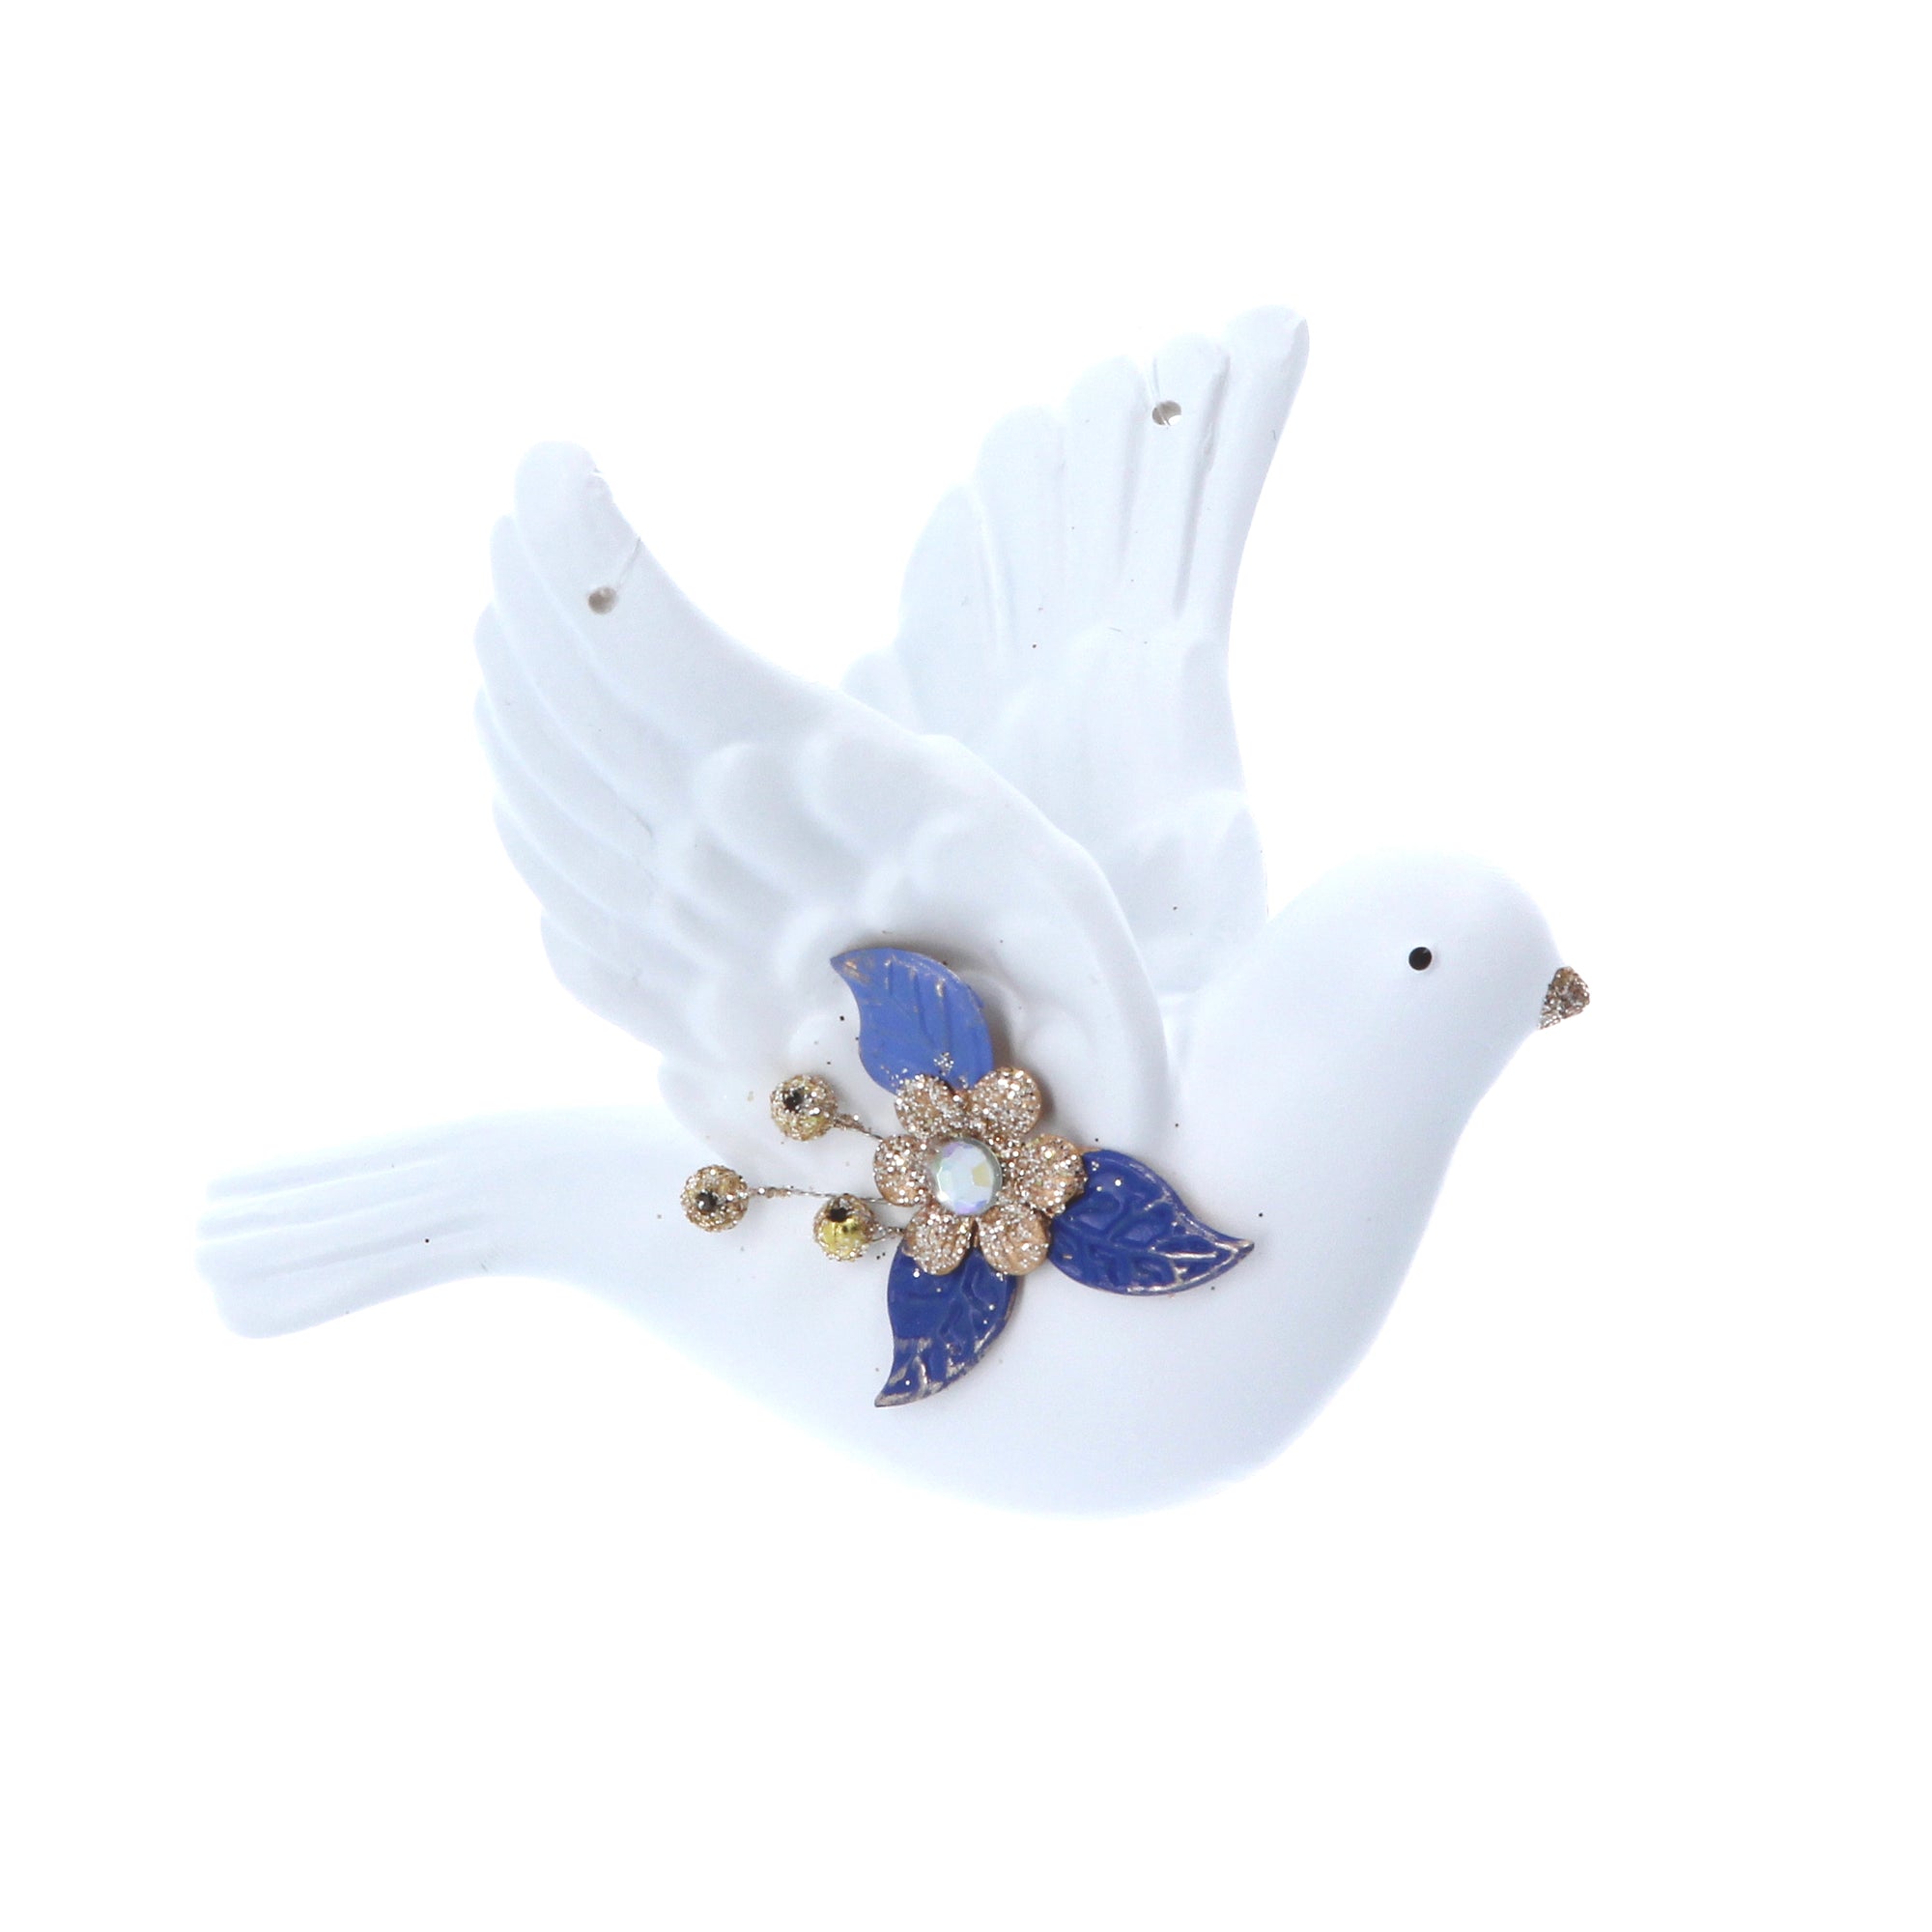 White Dove Ornament with Gold and Blue Decoration | Putti Christmas 